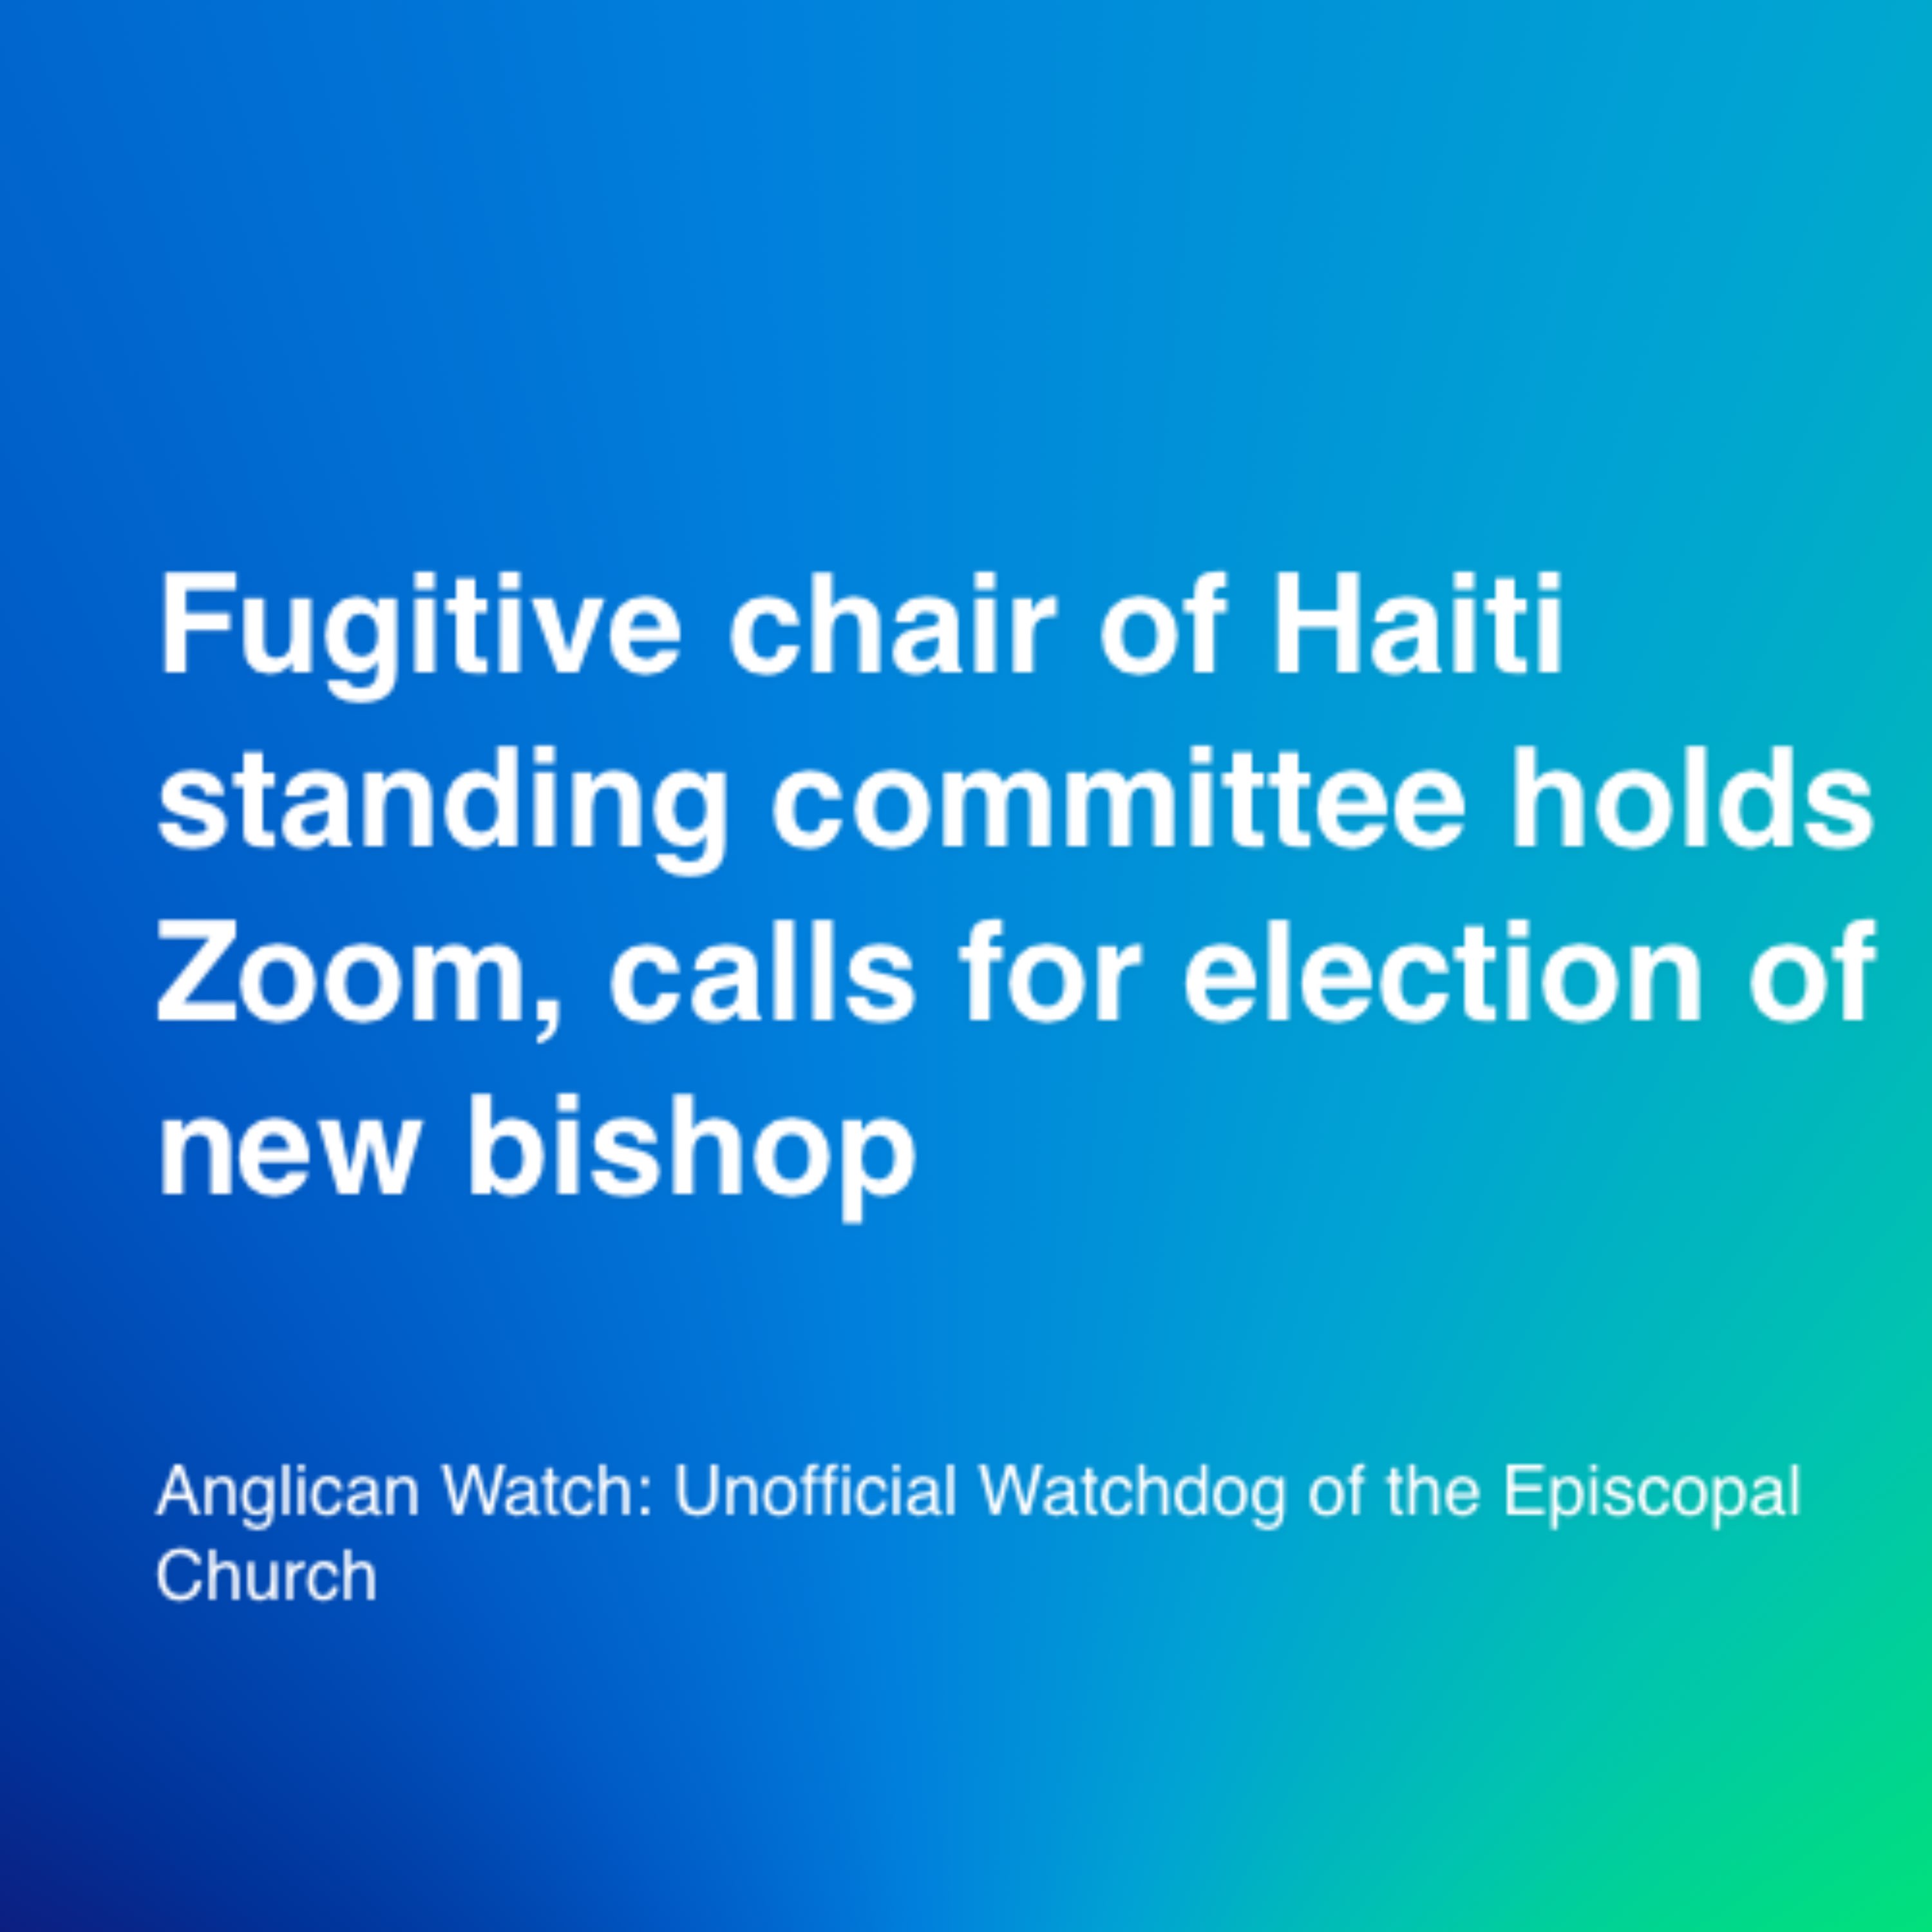 Fugitive chair of Haiti standing committee holds Zoom, calls for election of new bishop